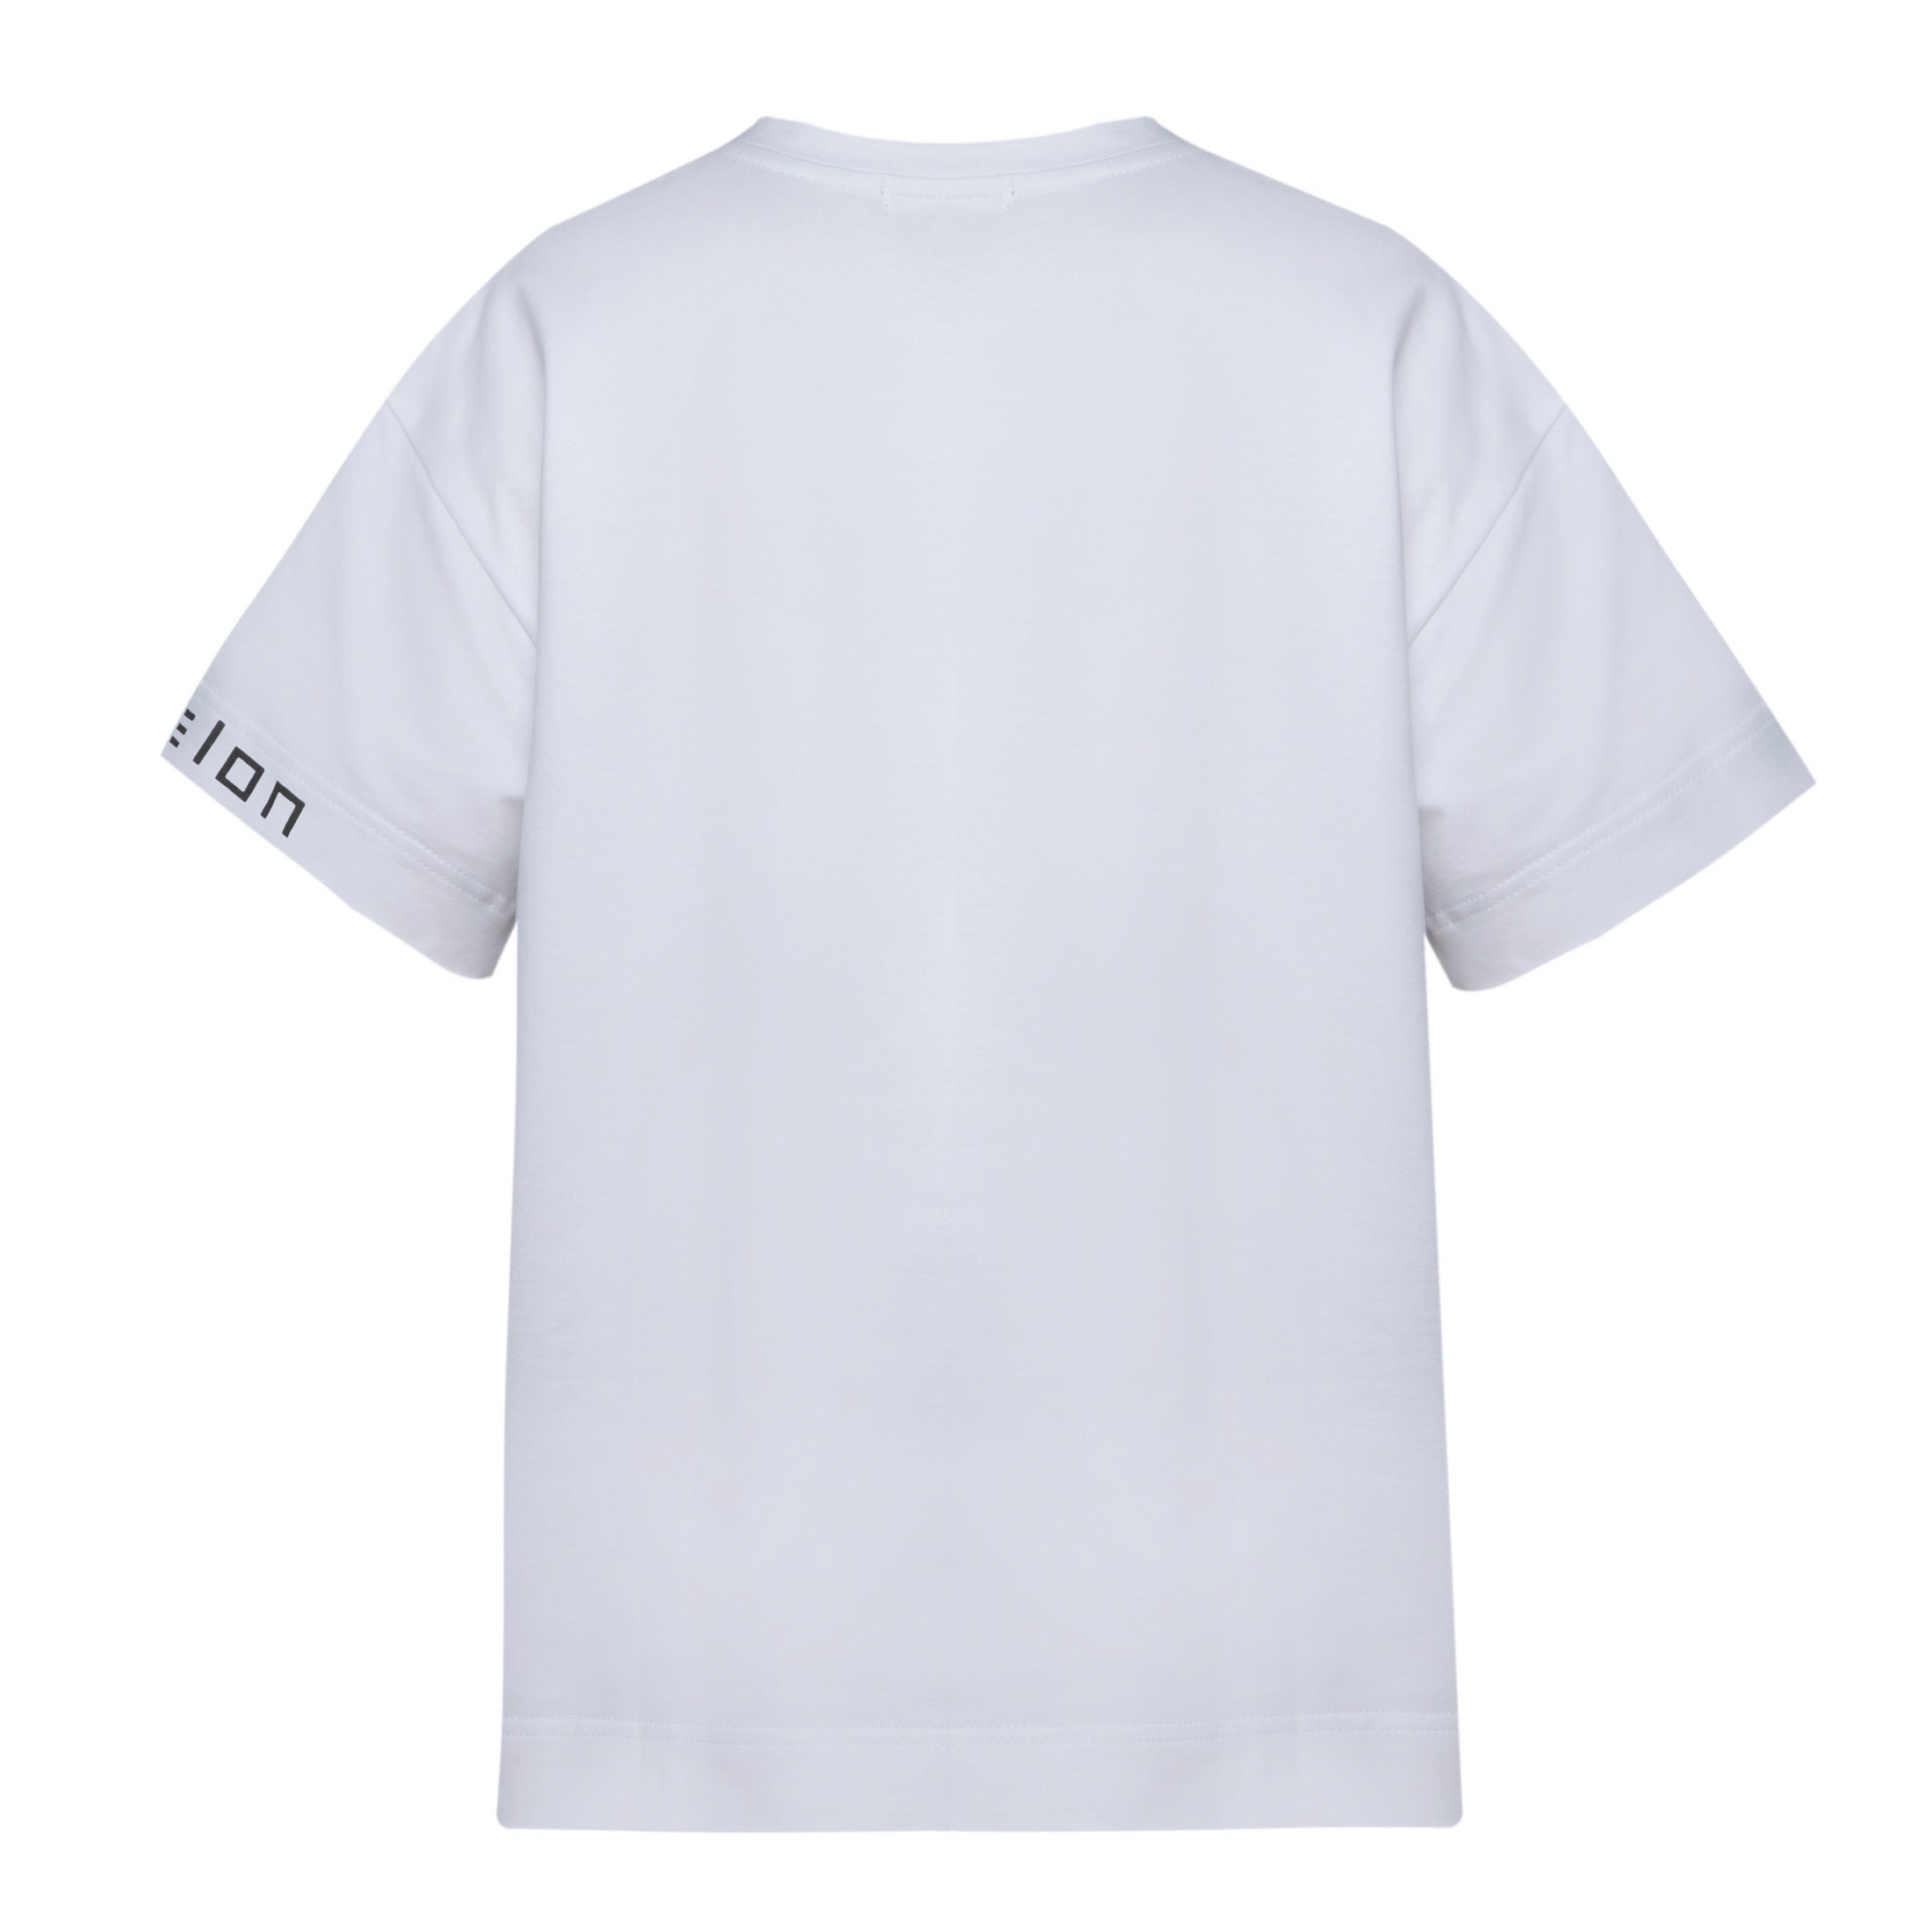 Straight women's T-shirt in white color, logo on the sleeve